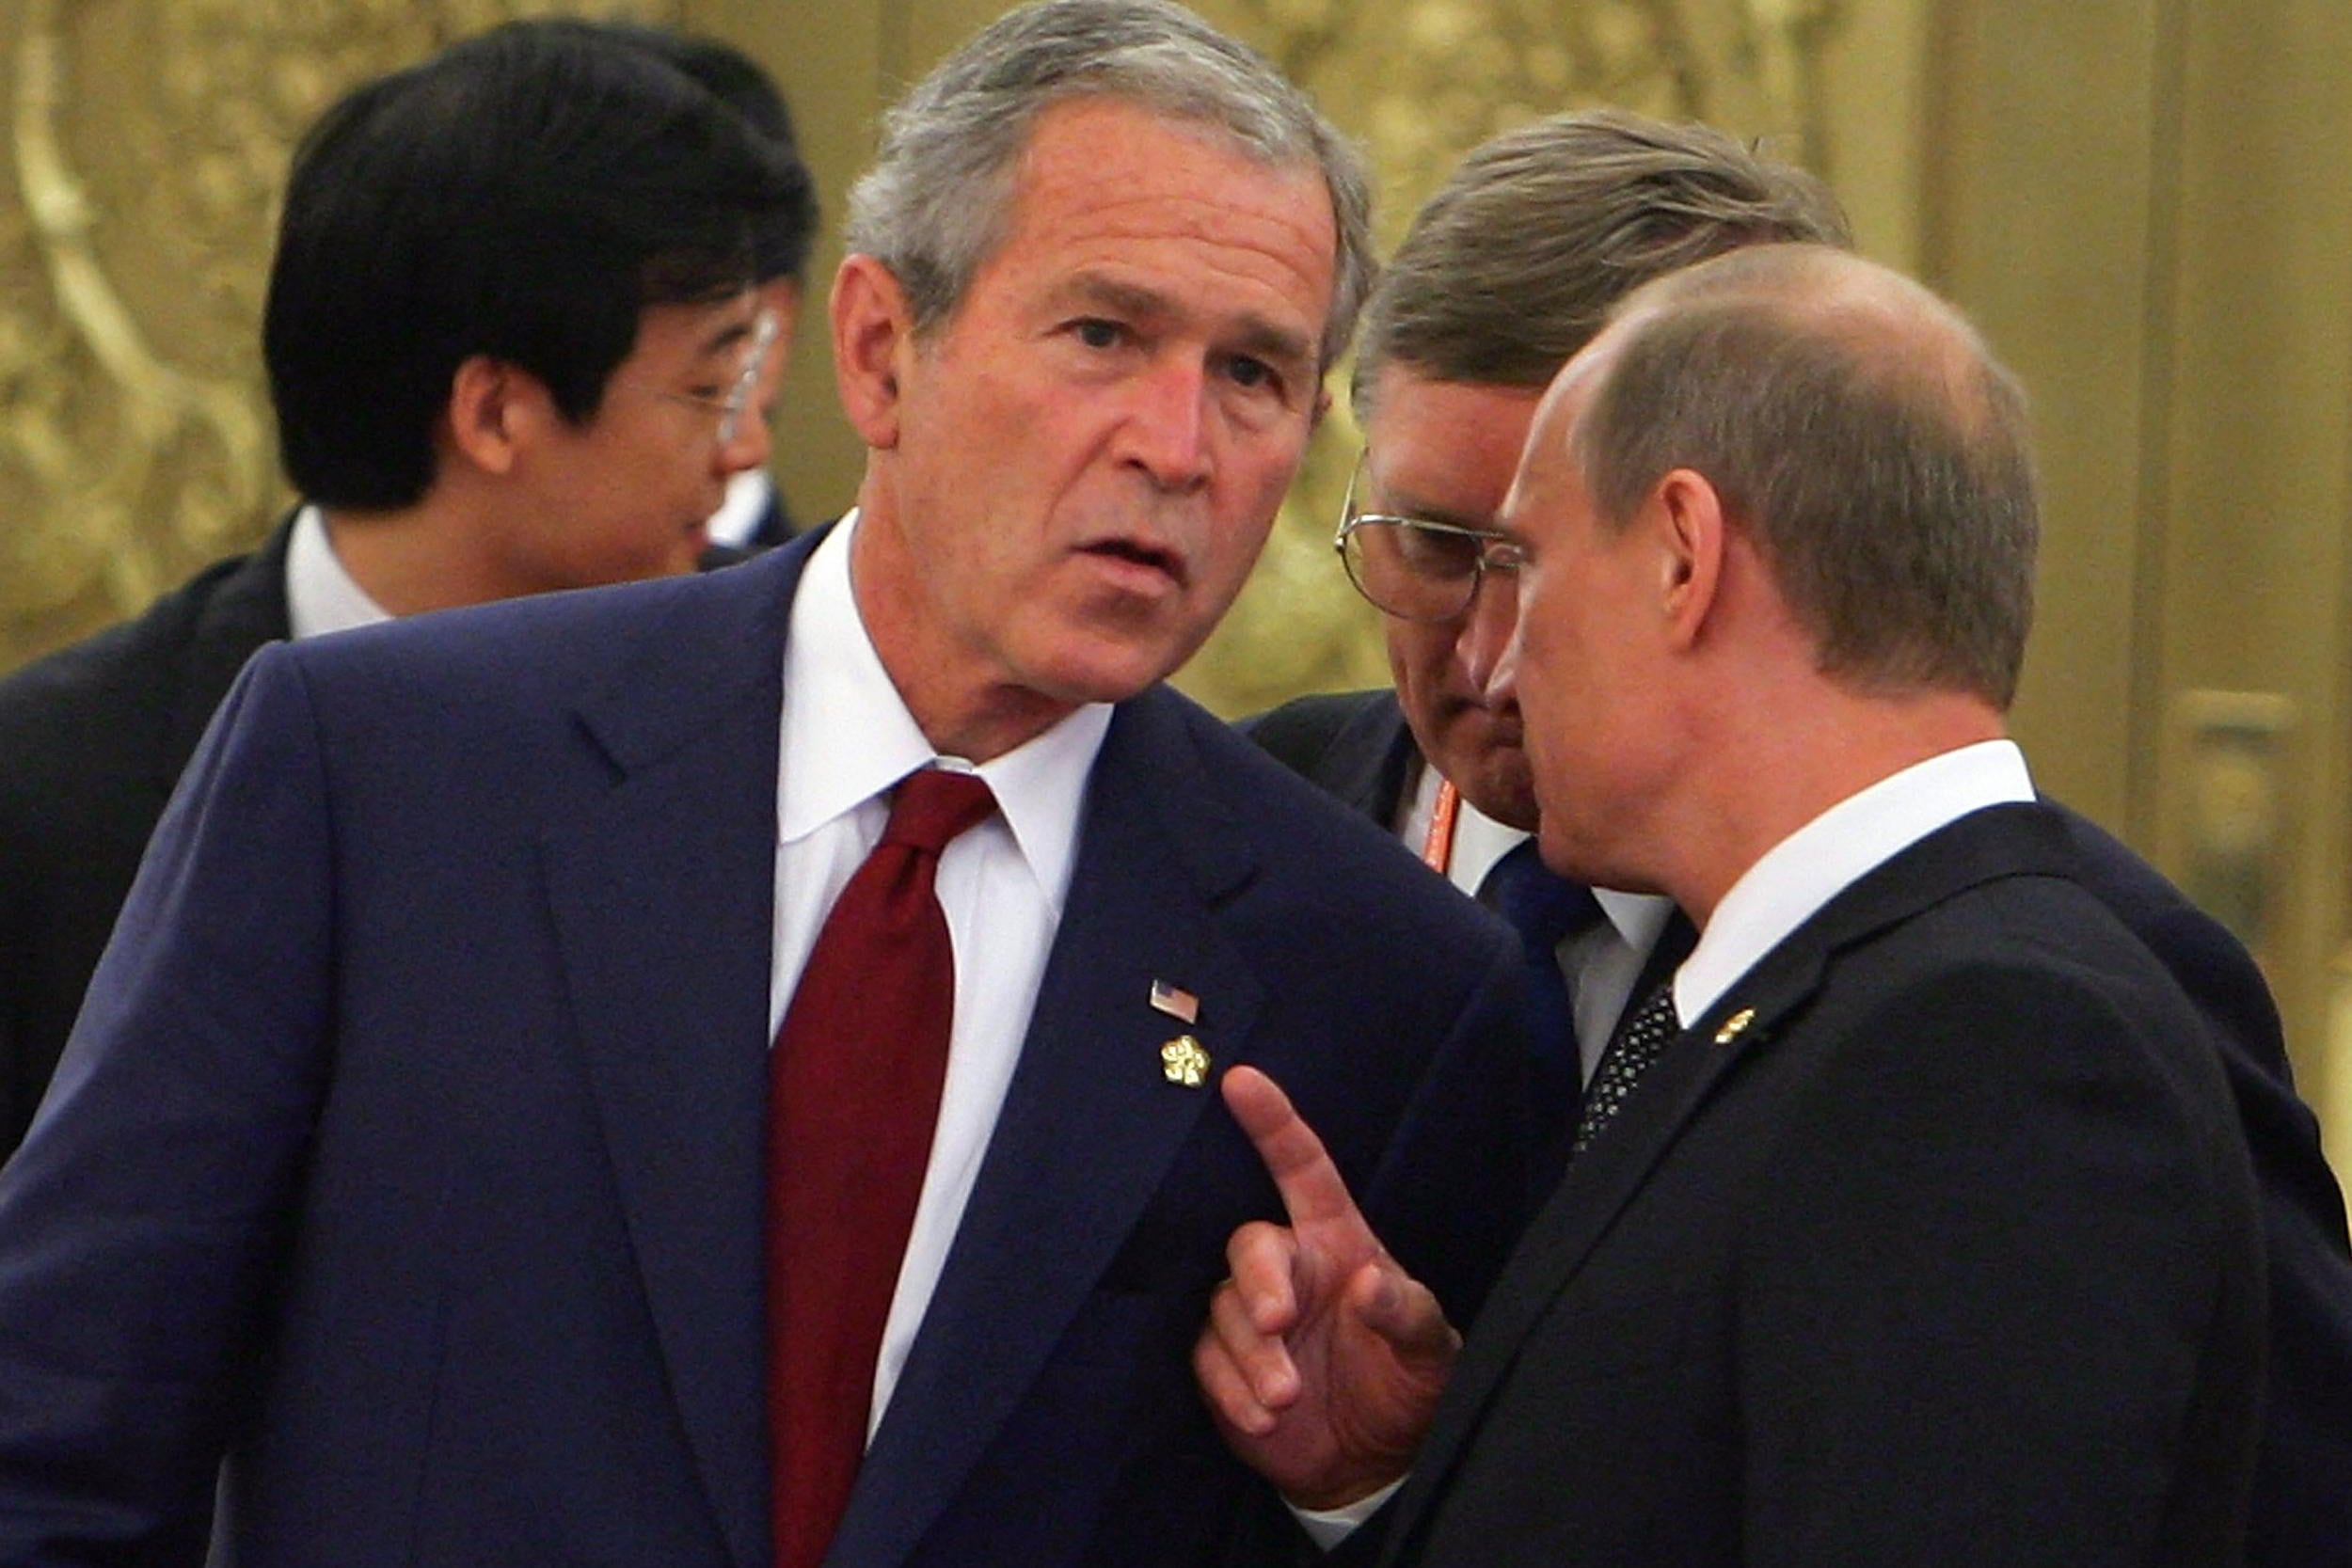 Bush leans in and looks like he's getting played by Putin.